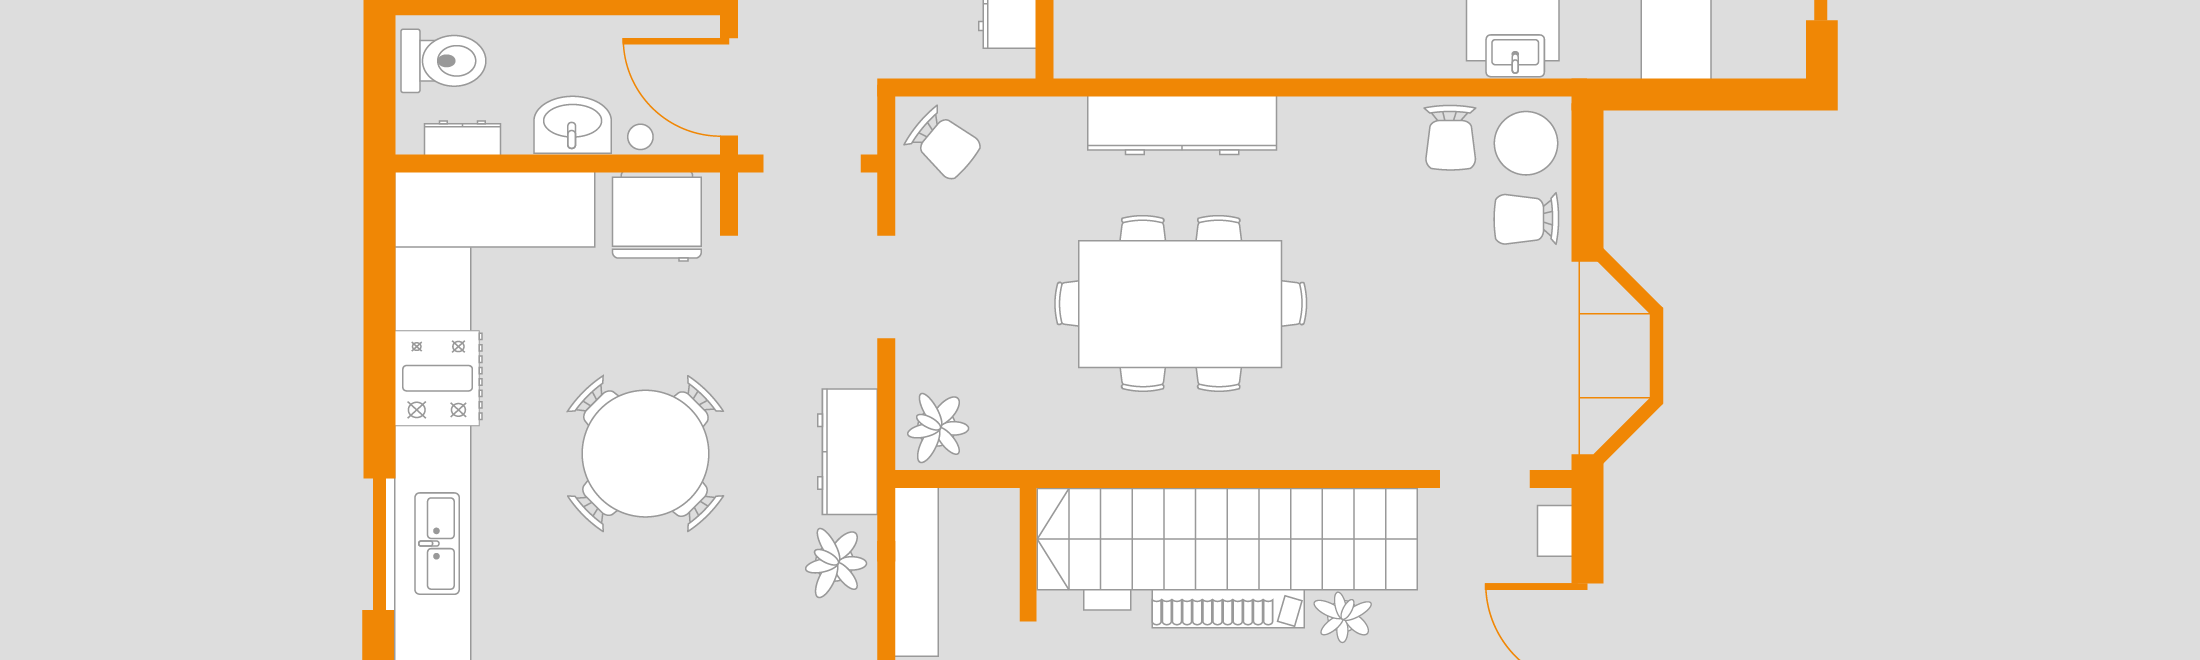 With draw.io you have the possibility to create your own floor plans.